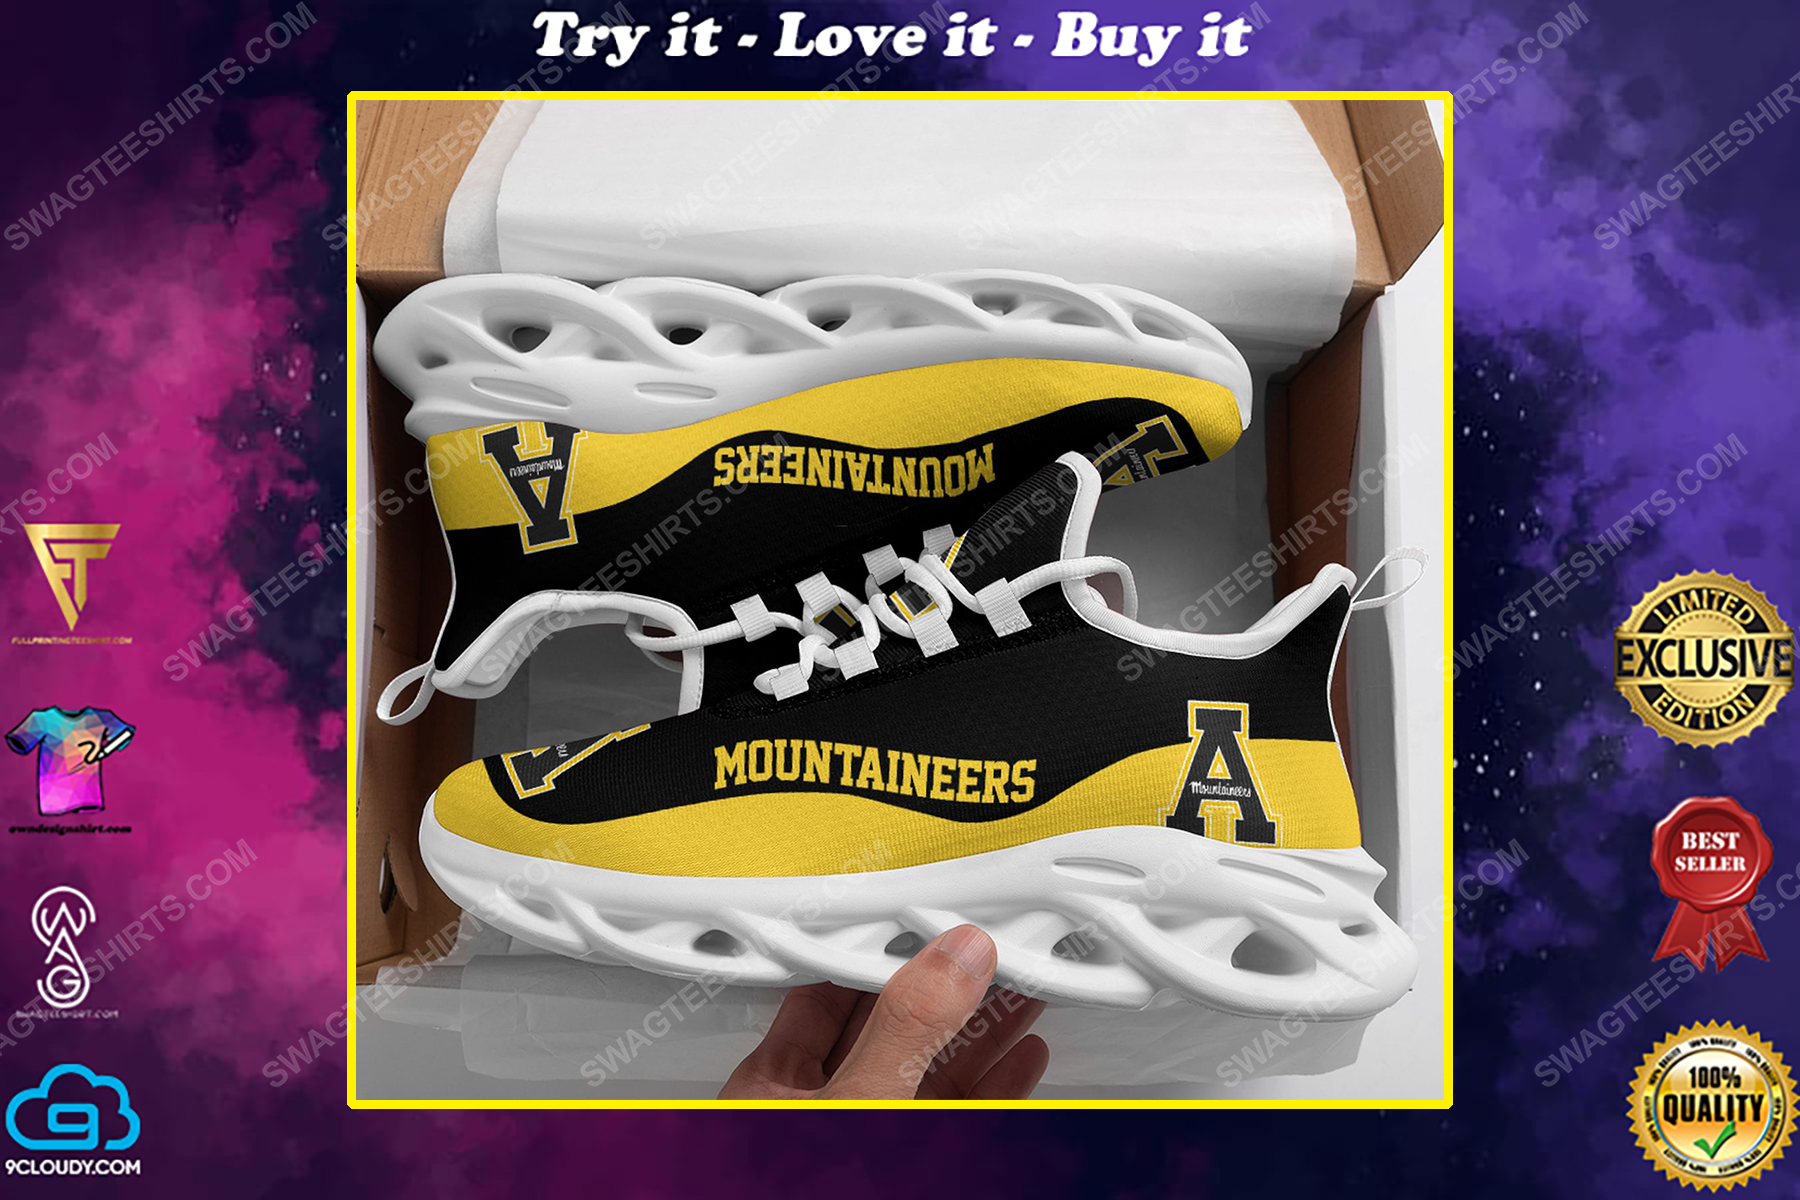 The appalachian state mountaineers football team max soul shoes